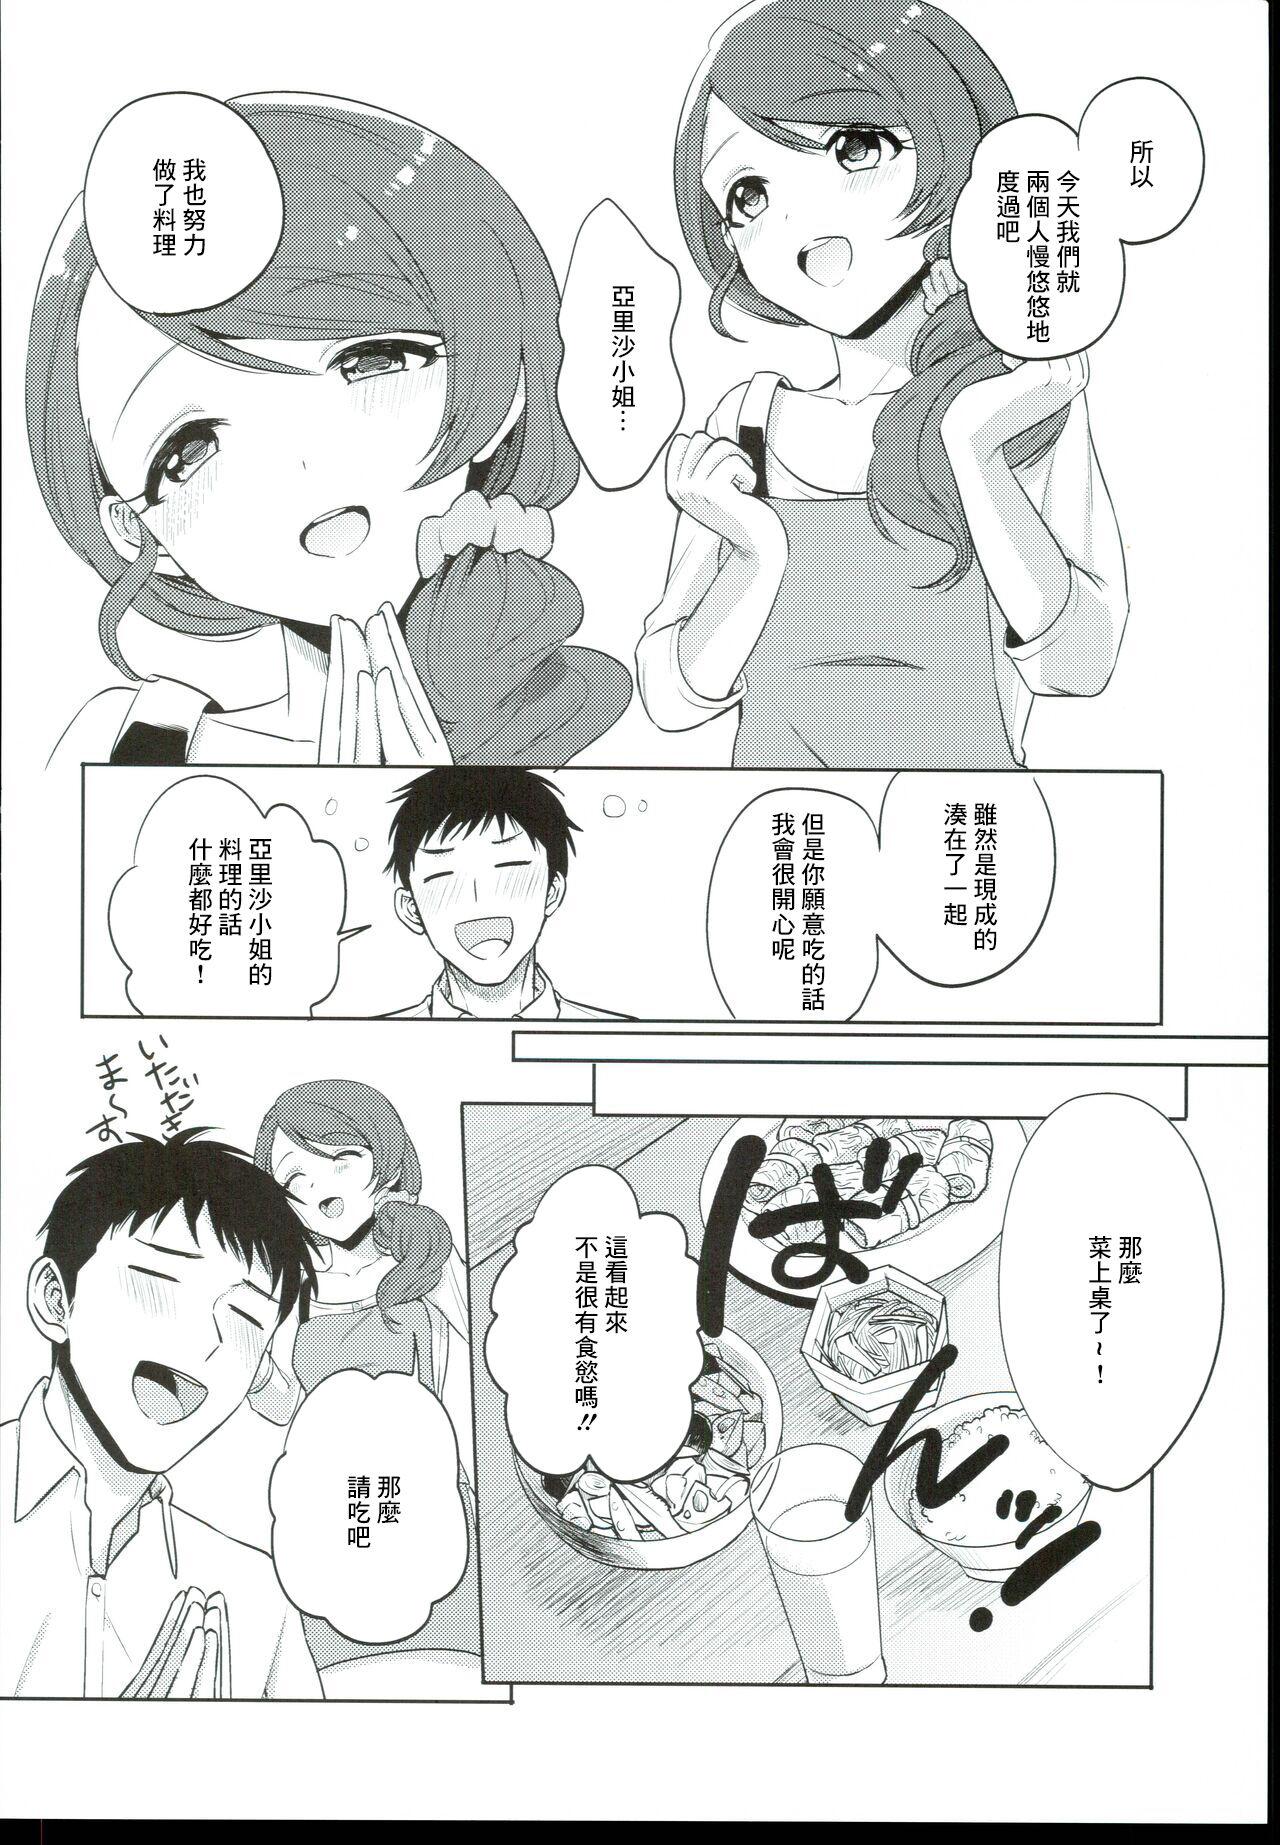 Face Fucking Onegai! Arisa-Tente - The idolmaster Pigtails - Page 5